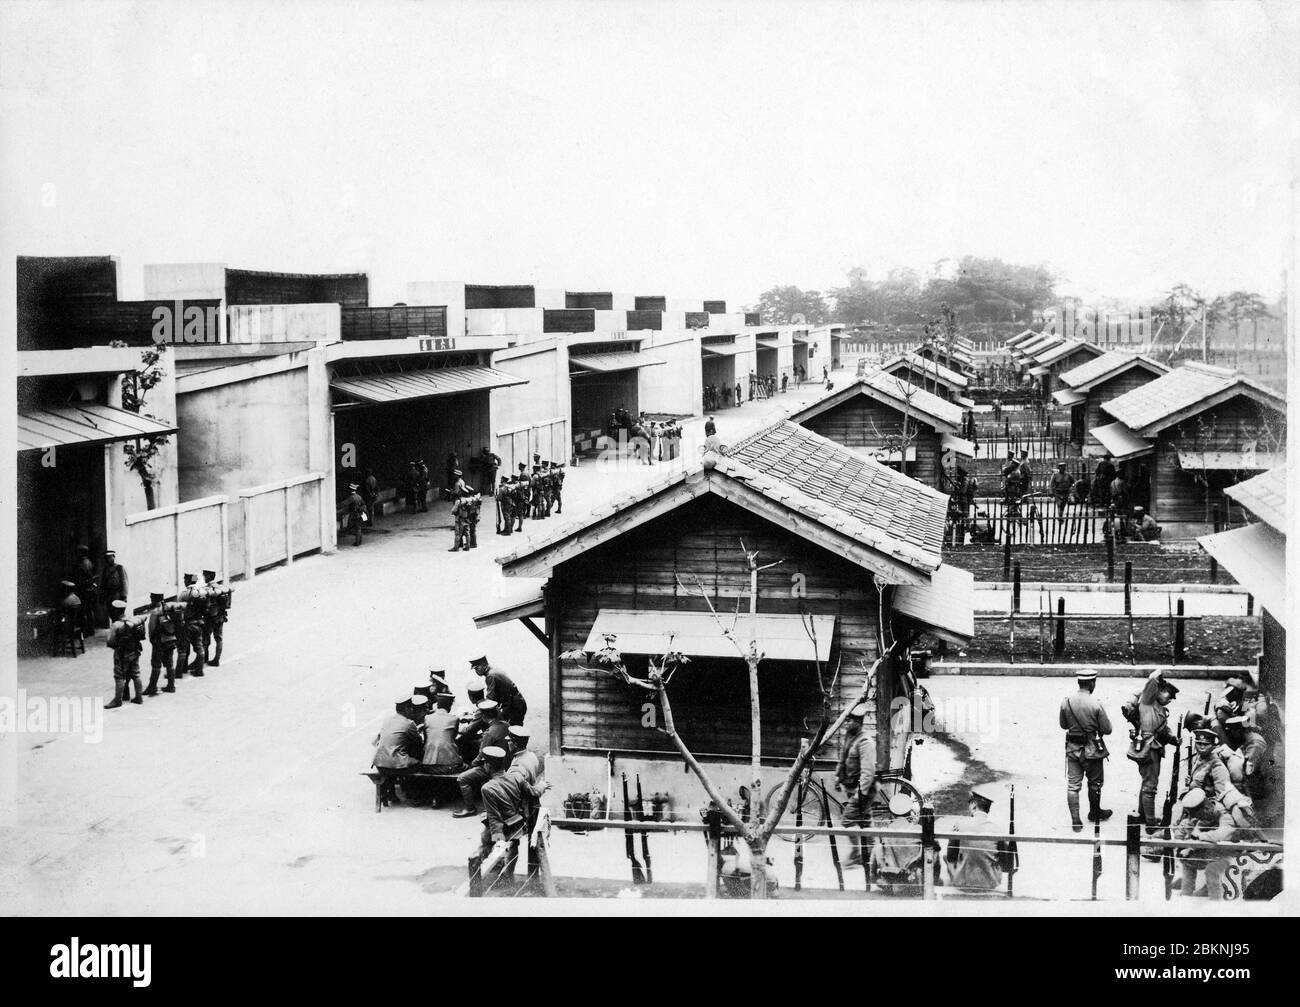 [ 1920s Japan - Japanese Military Firing Range ] —   Toyama Firing Range (戸山射撃場, Toyama Shagekijo) in Okubo (大久保), Tokyo. It was used by the Imperial Guard.   It consisted of seven 300 meter long reinforced concrete buildings into which soldiers shot their automatic and other weapons.  From a private photo album of a member of the Japanese Imperial Guard (Konoe Shidan) who served between 1928 (Showa 3) and 1930 (Showa 5).  20th century gelatin silver print. Stock Photo